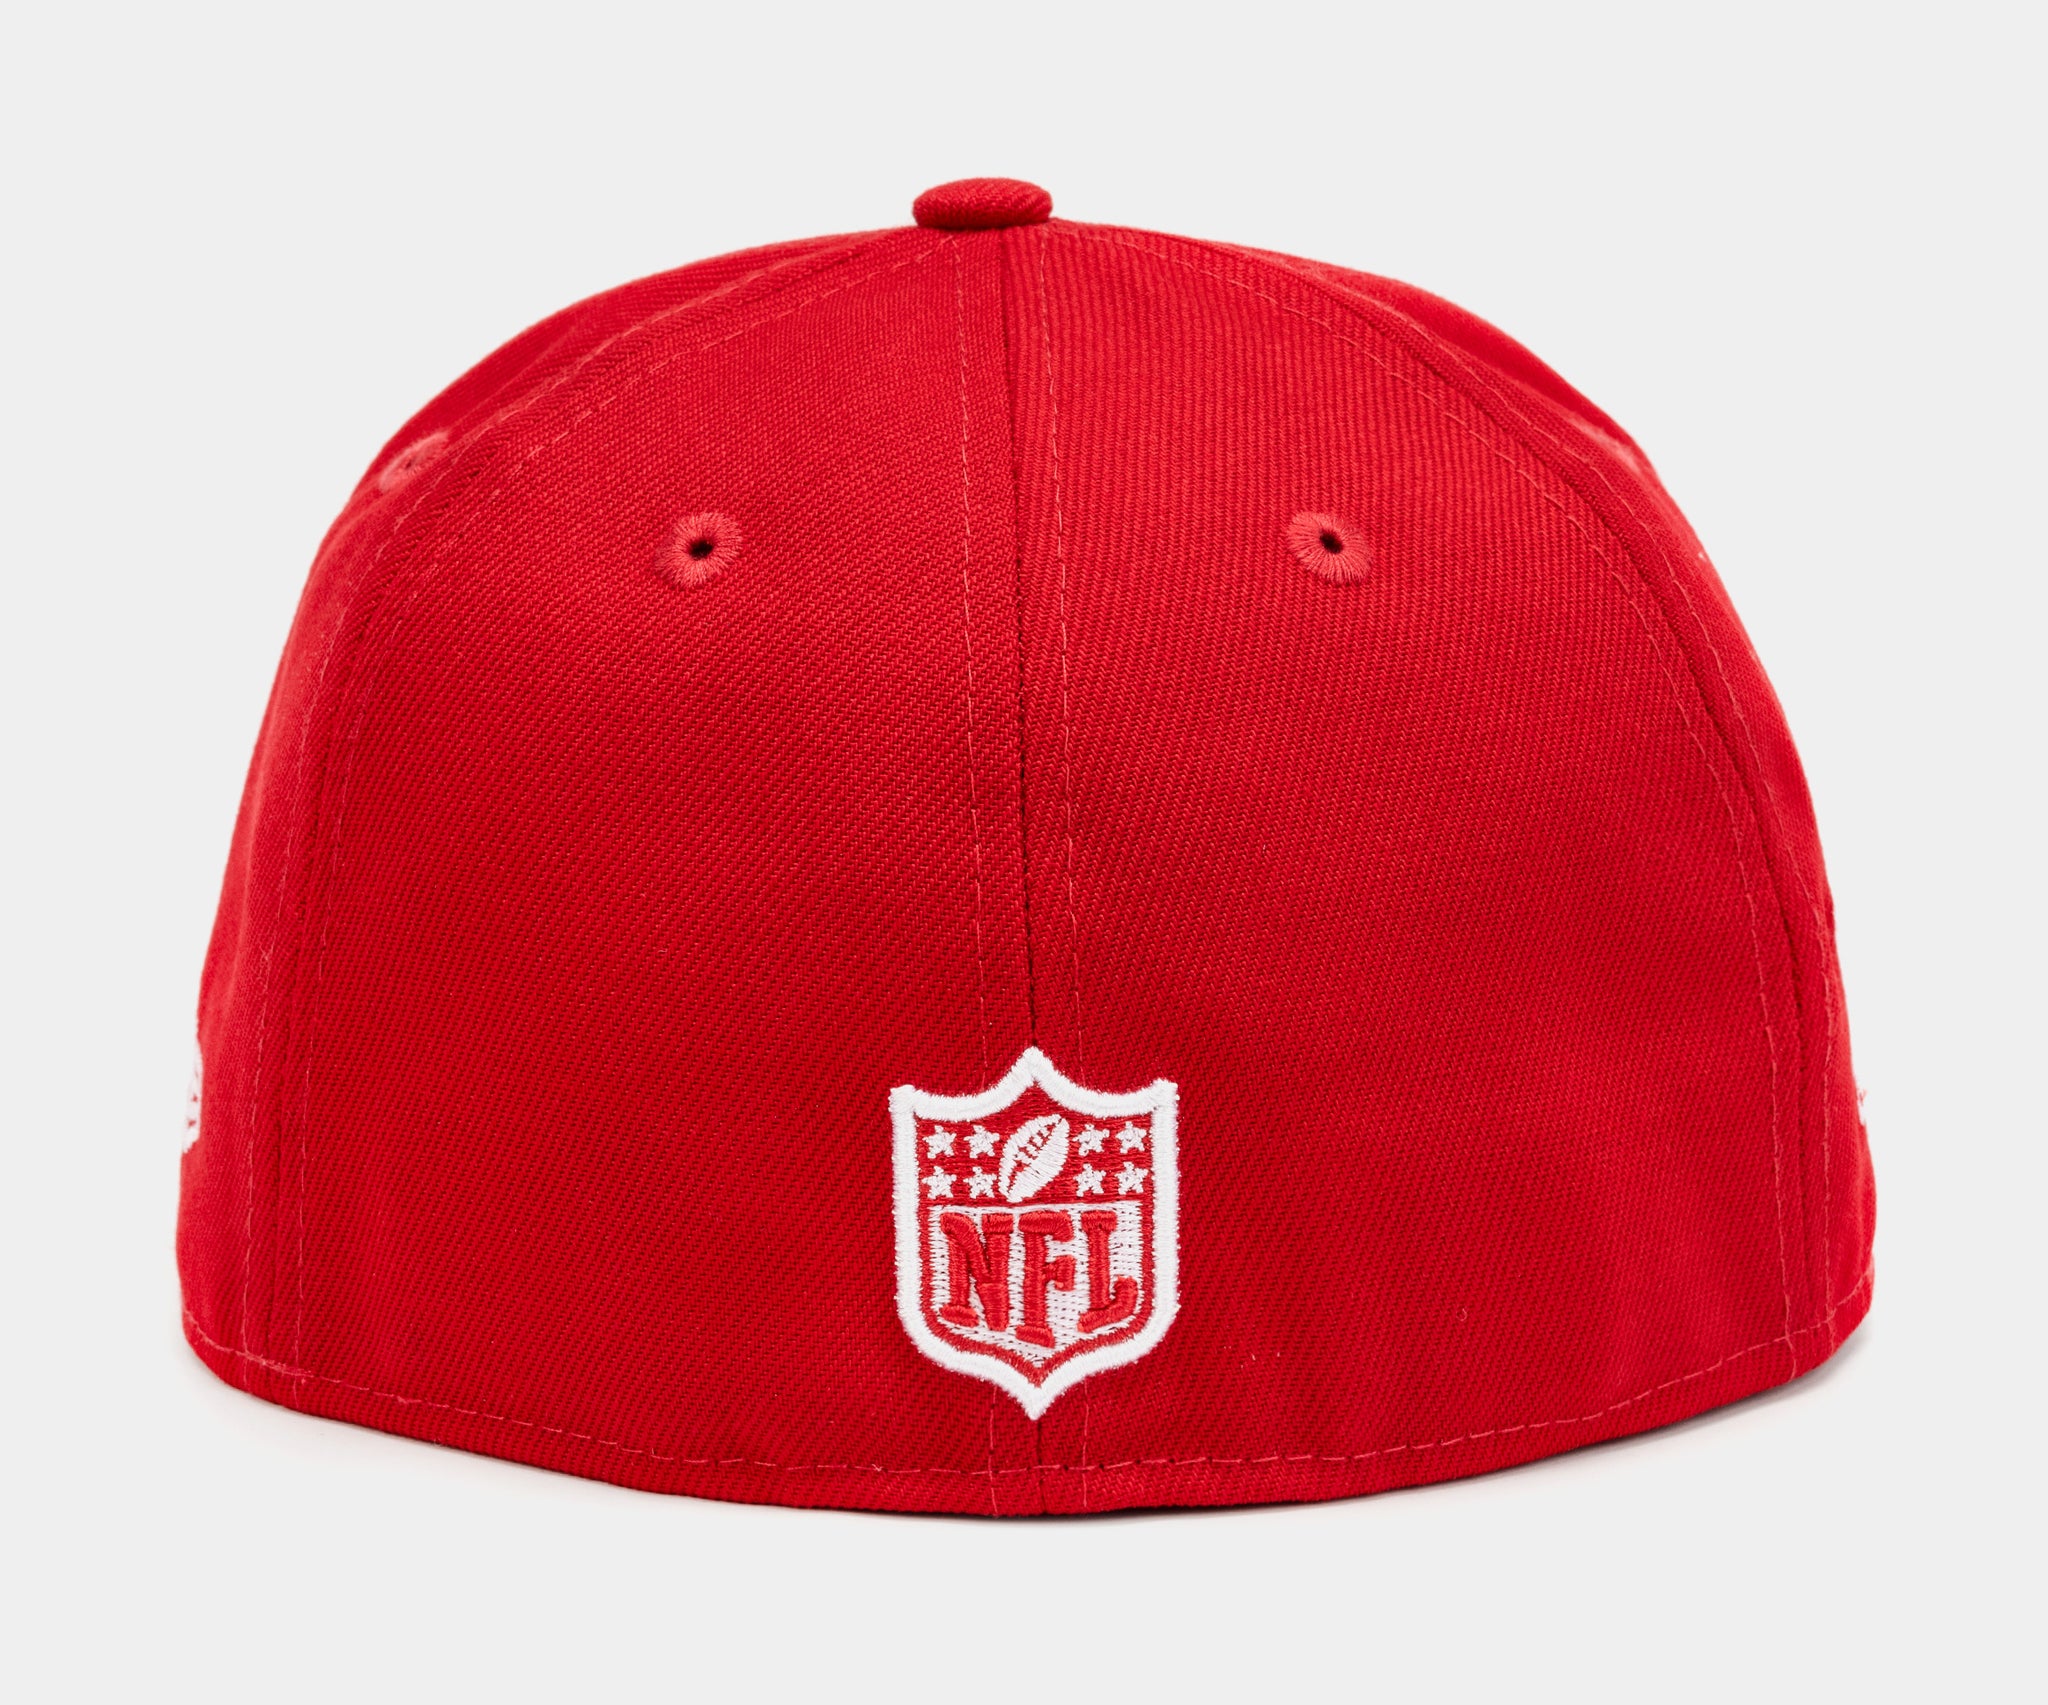 New Era Las Vegas Raiders Red 59FIFTY Mens Fitted Hat Red 60398815 ...